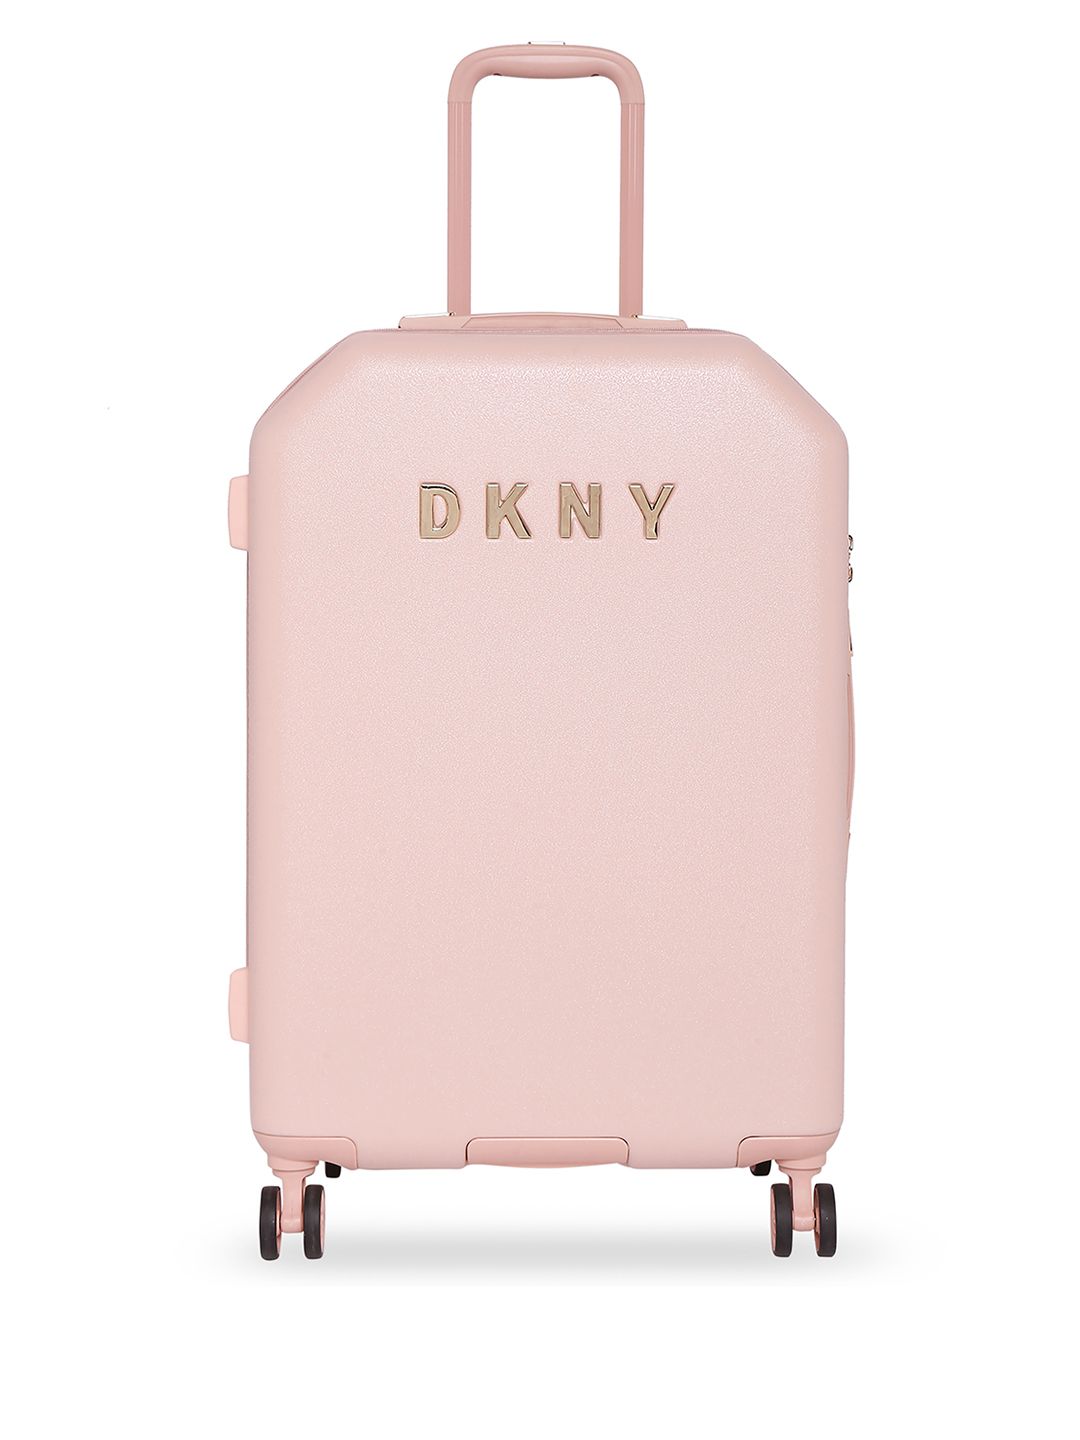 DKNY ALLORE Pink Textured Allore Hard-Sided Large Trolley Suitcase Price in India